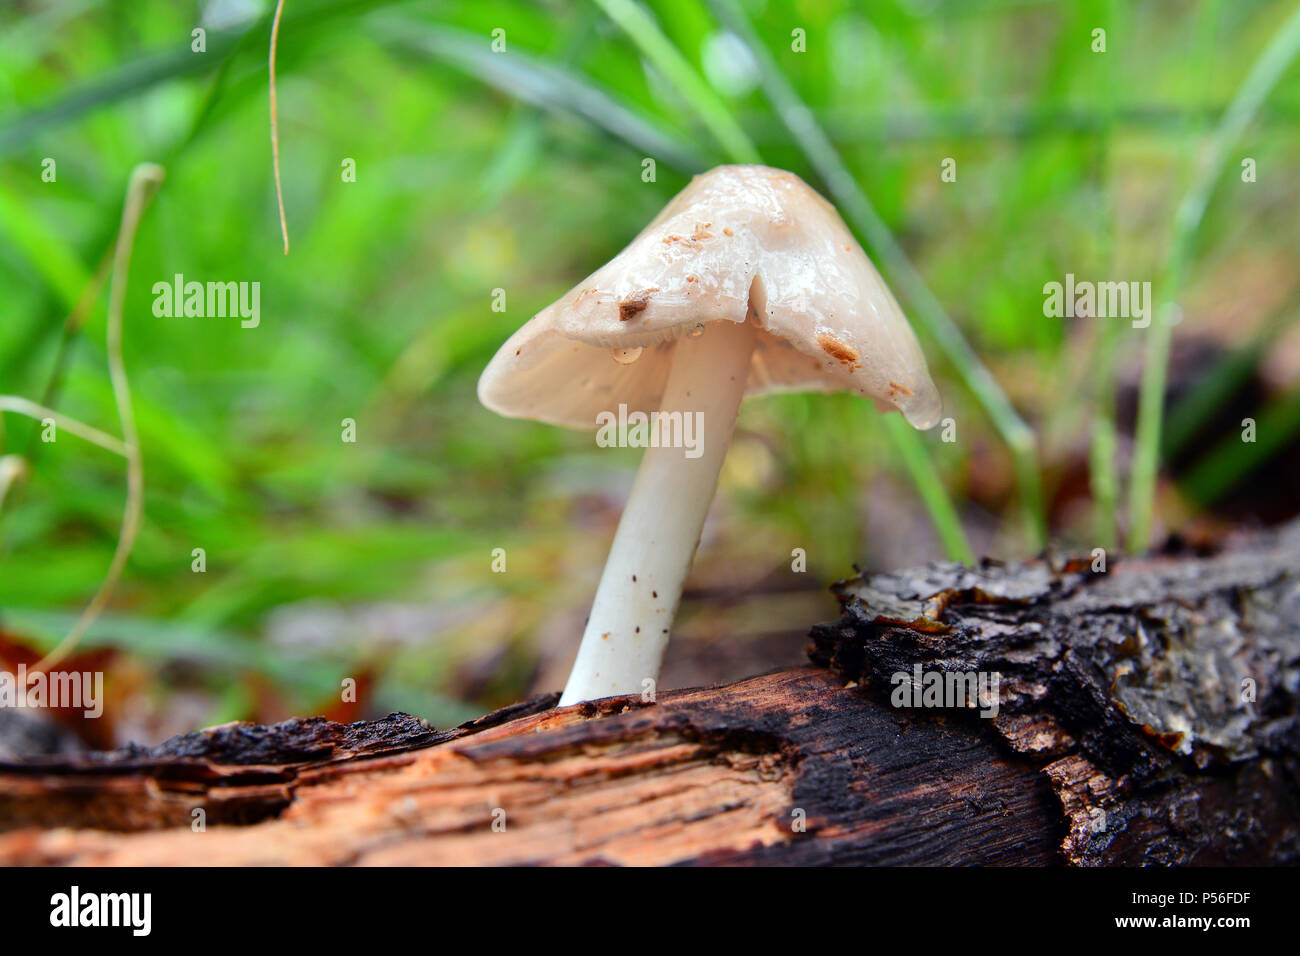 pluteus mushroom in the forest Stock Photo